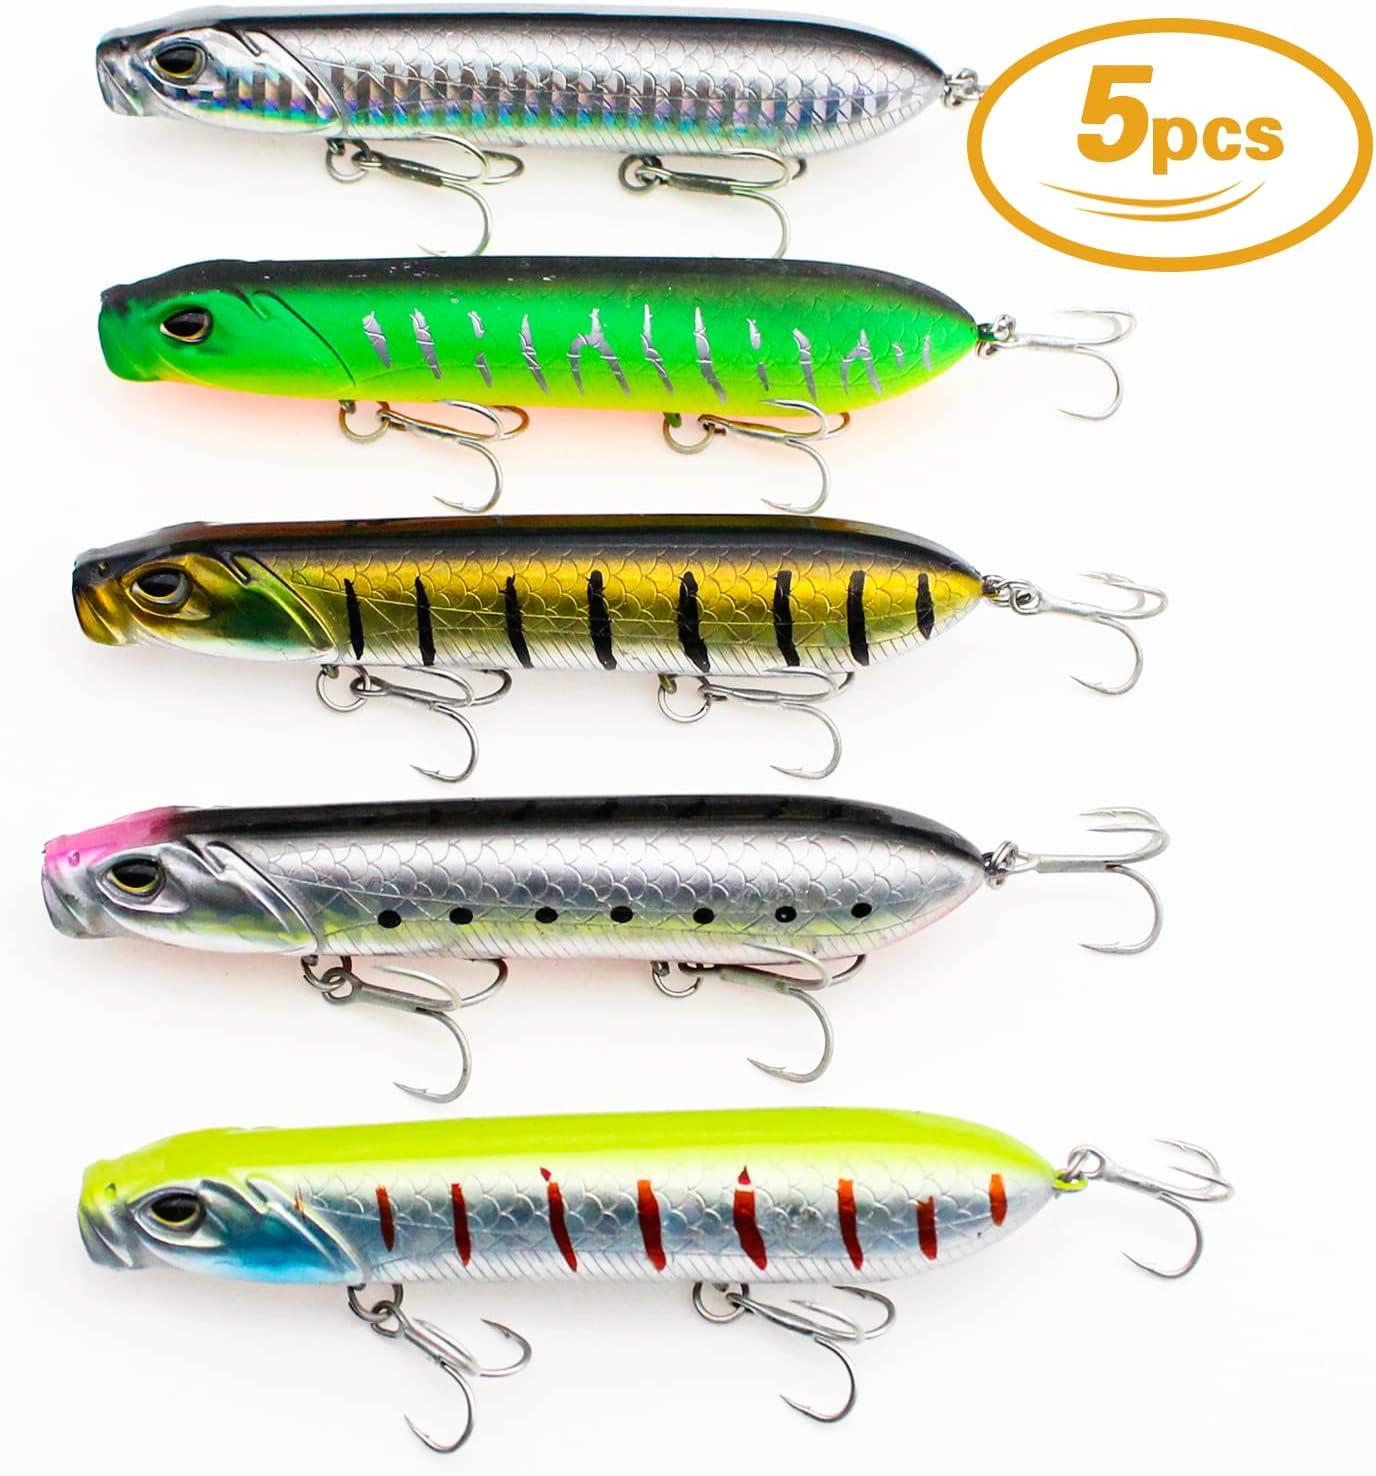 OROOTL Lipless Crankbait for Bass Fishing Artificial Hard Fishing Lures Kit  Minnow Pencil VIB Popper Lure Swimbait Set for Crappie Bass Trout Walleye